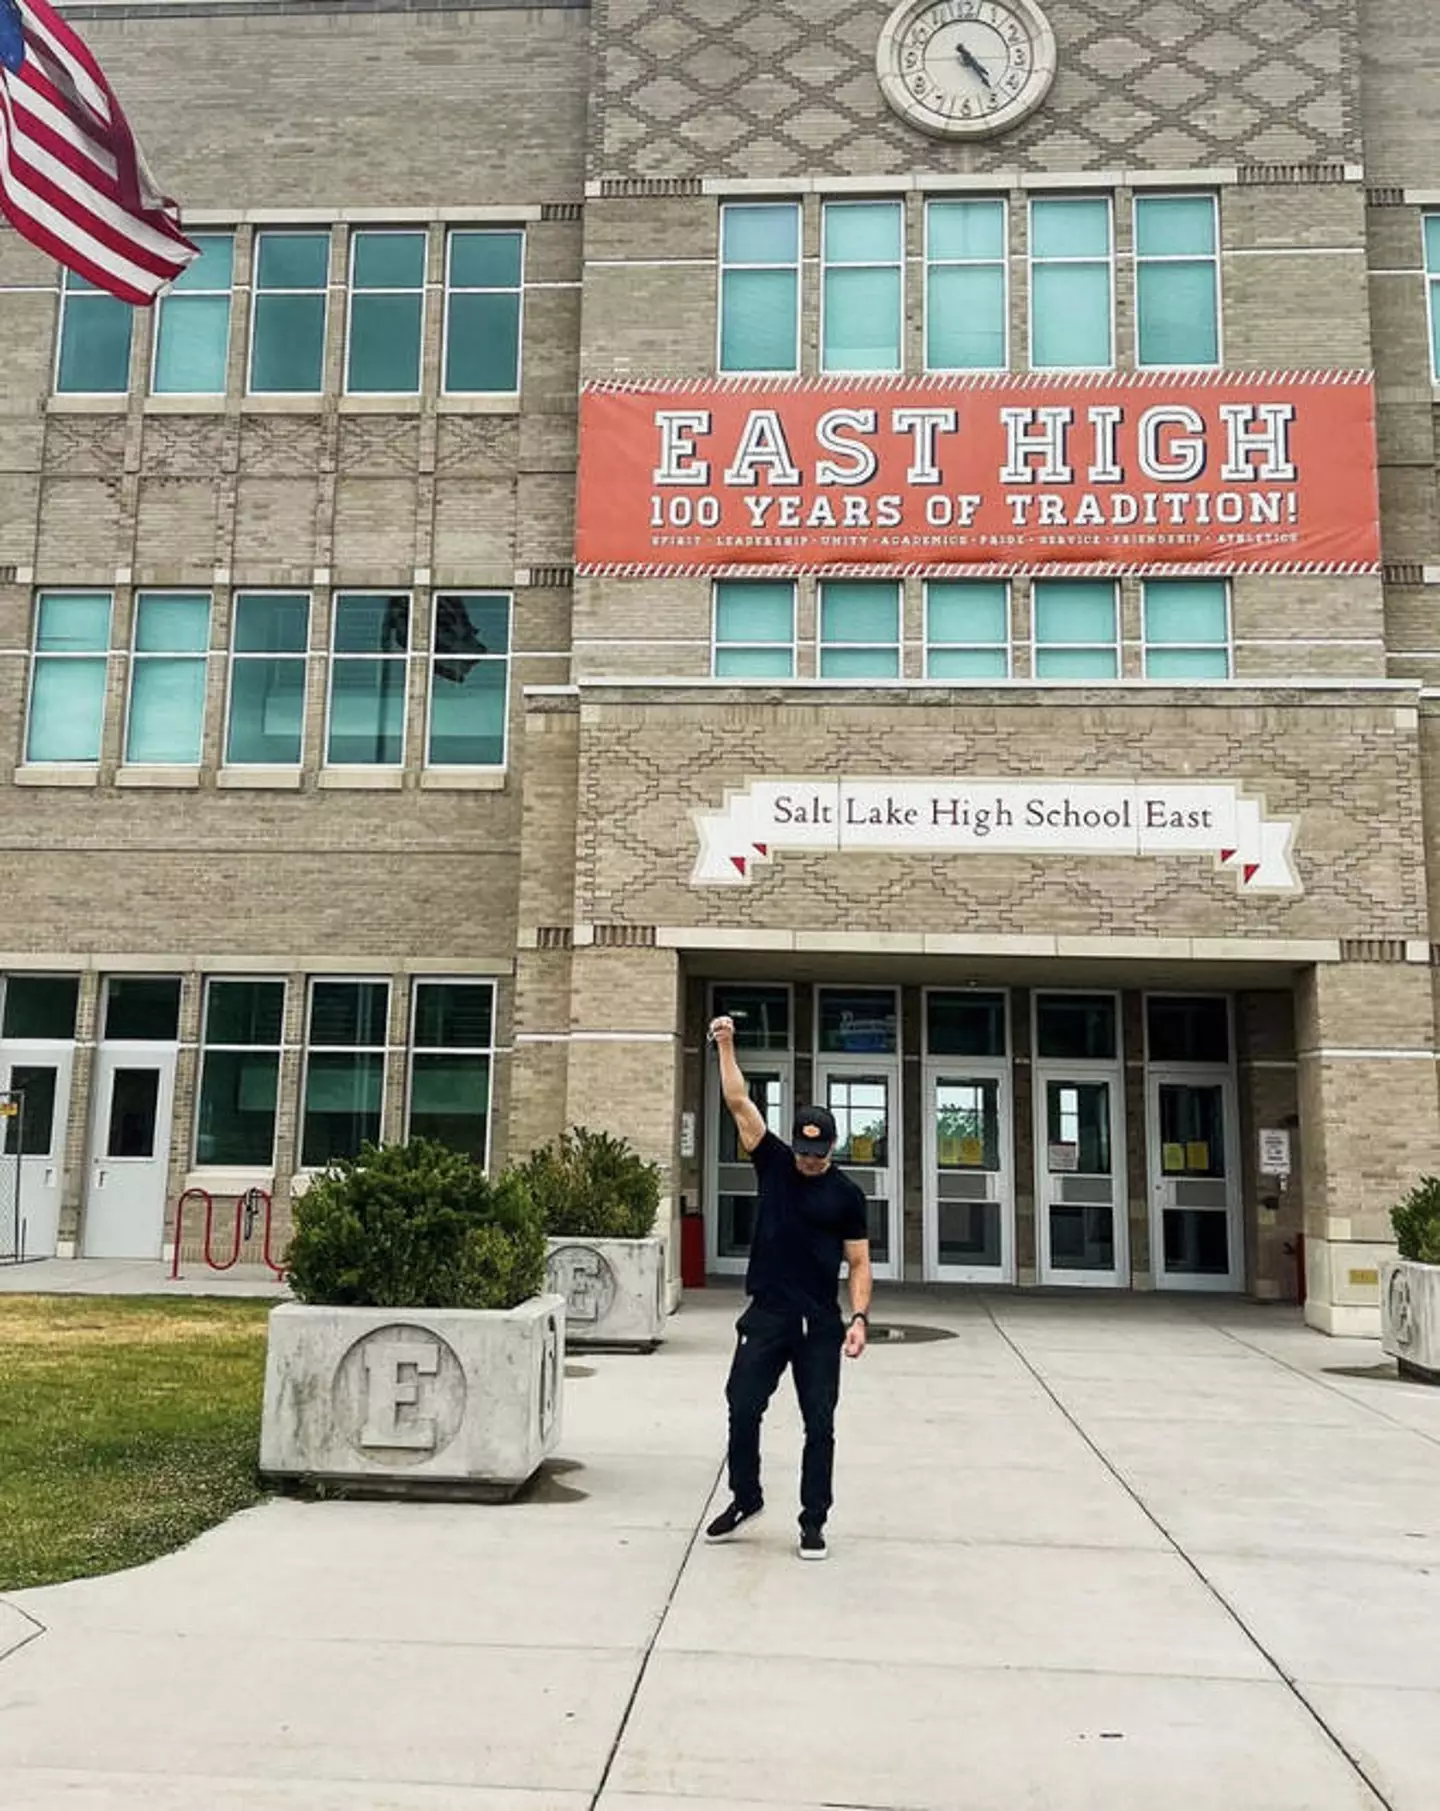 Zac Efron also made an appearance outside East High School.